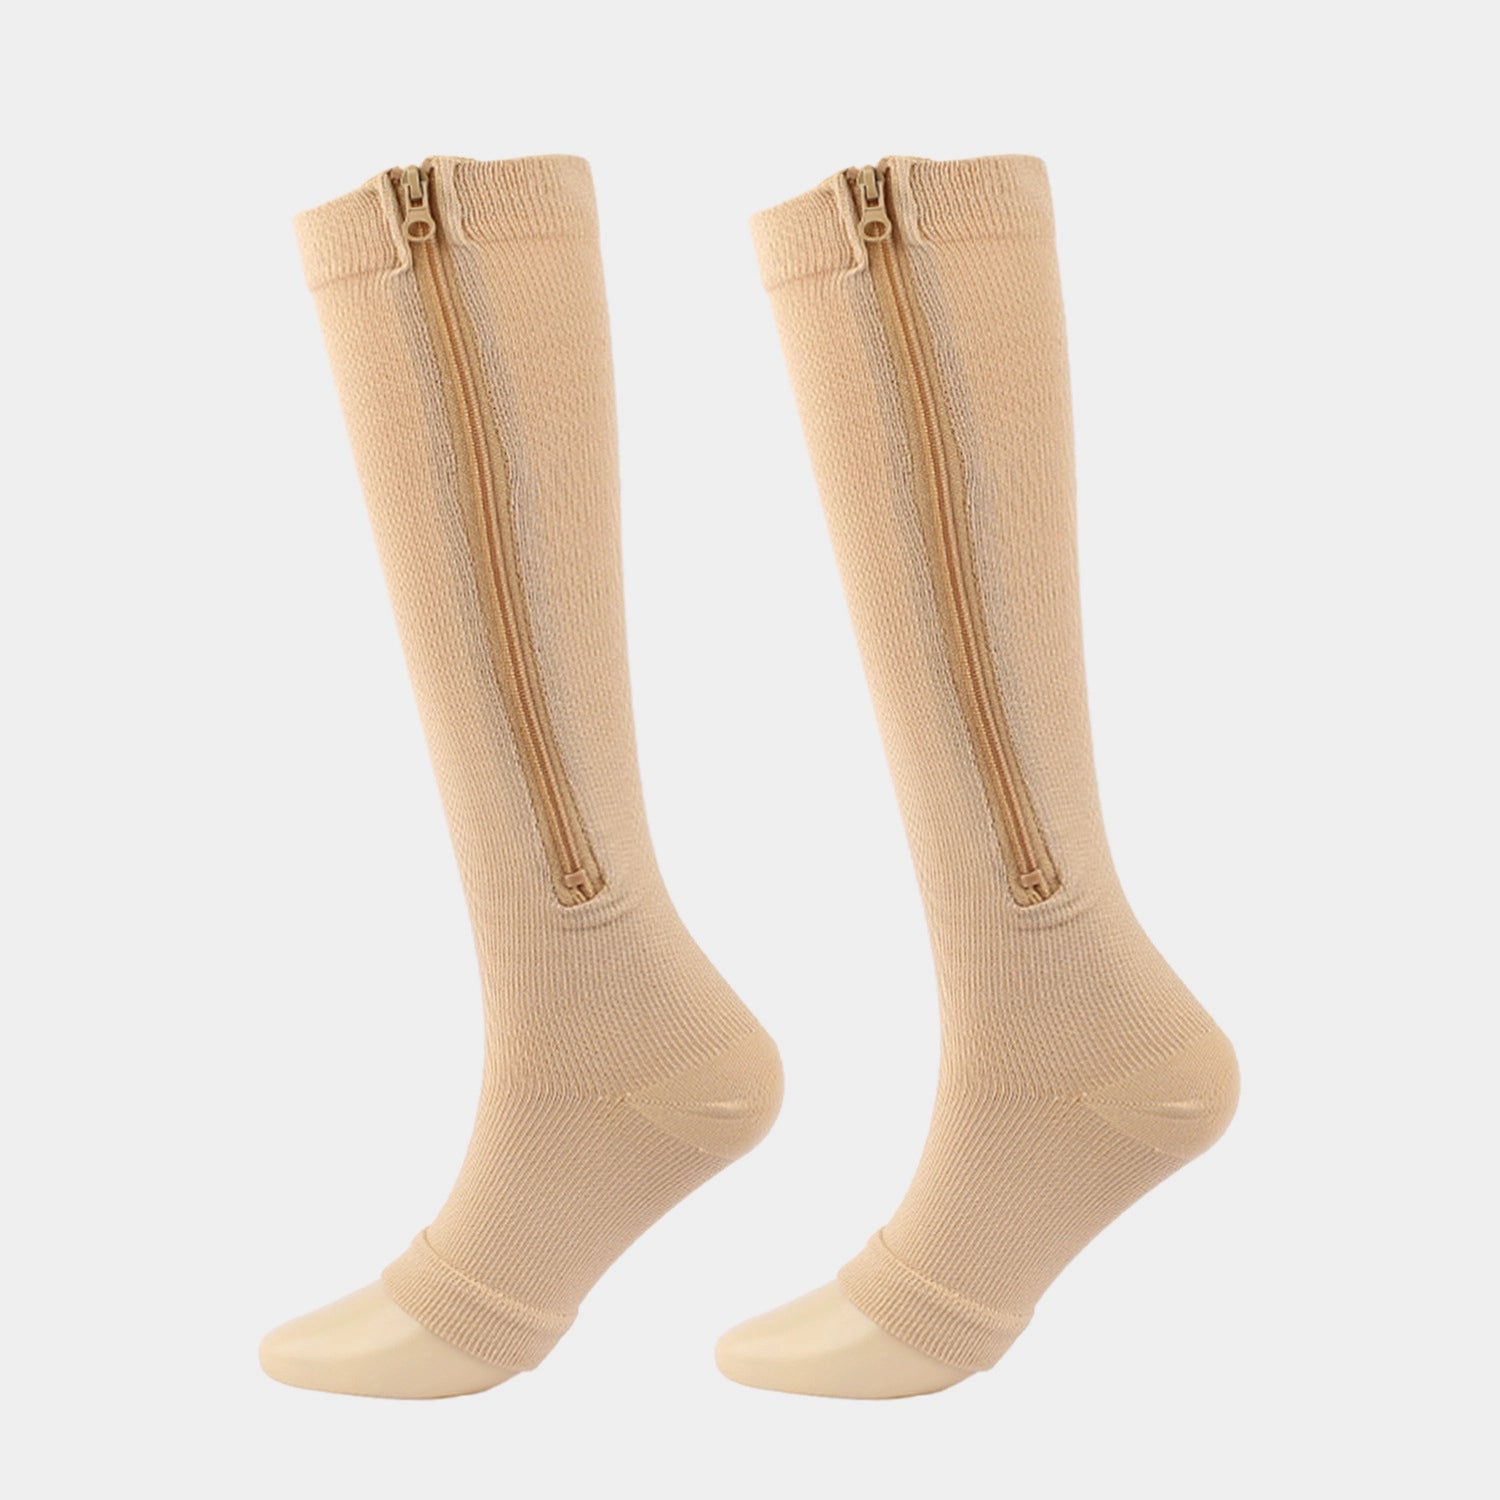 Copper Zipper Compression Socks - Zip Up Support Stockings ~ Easy to Wear!